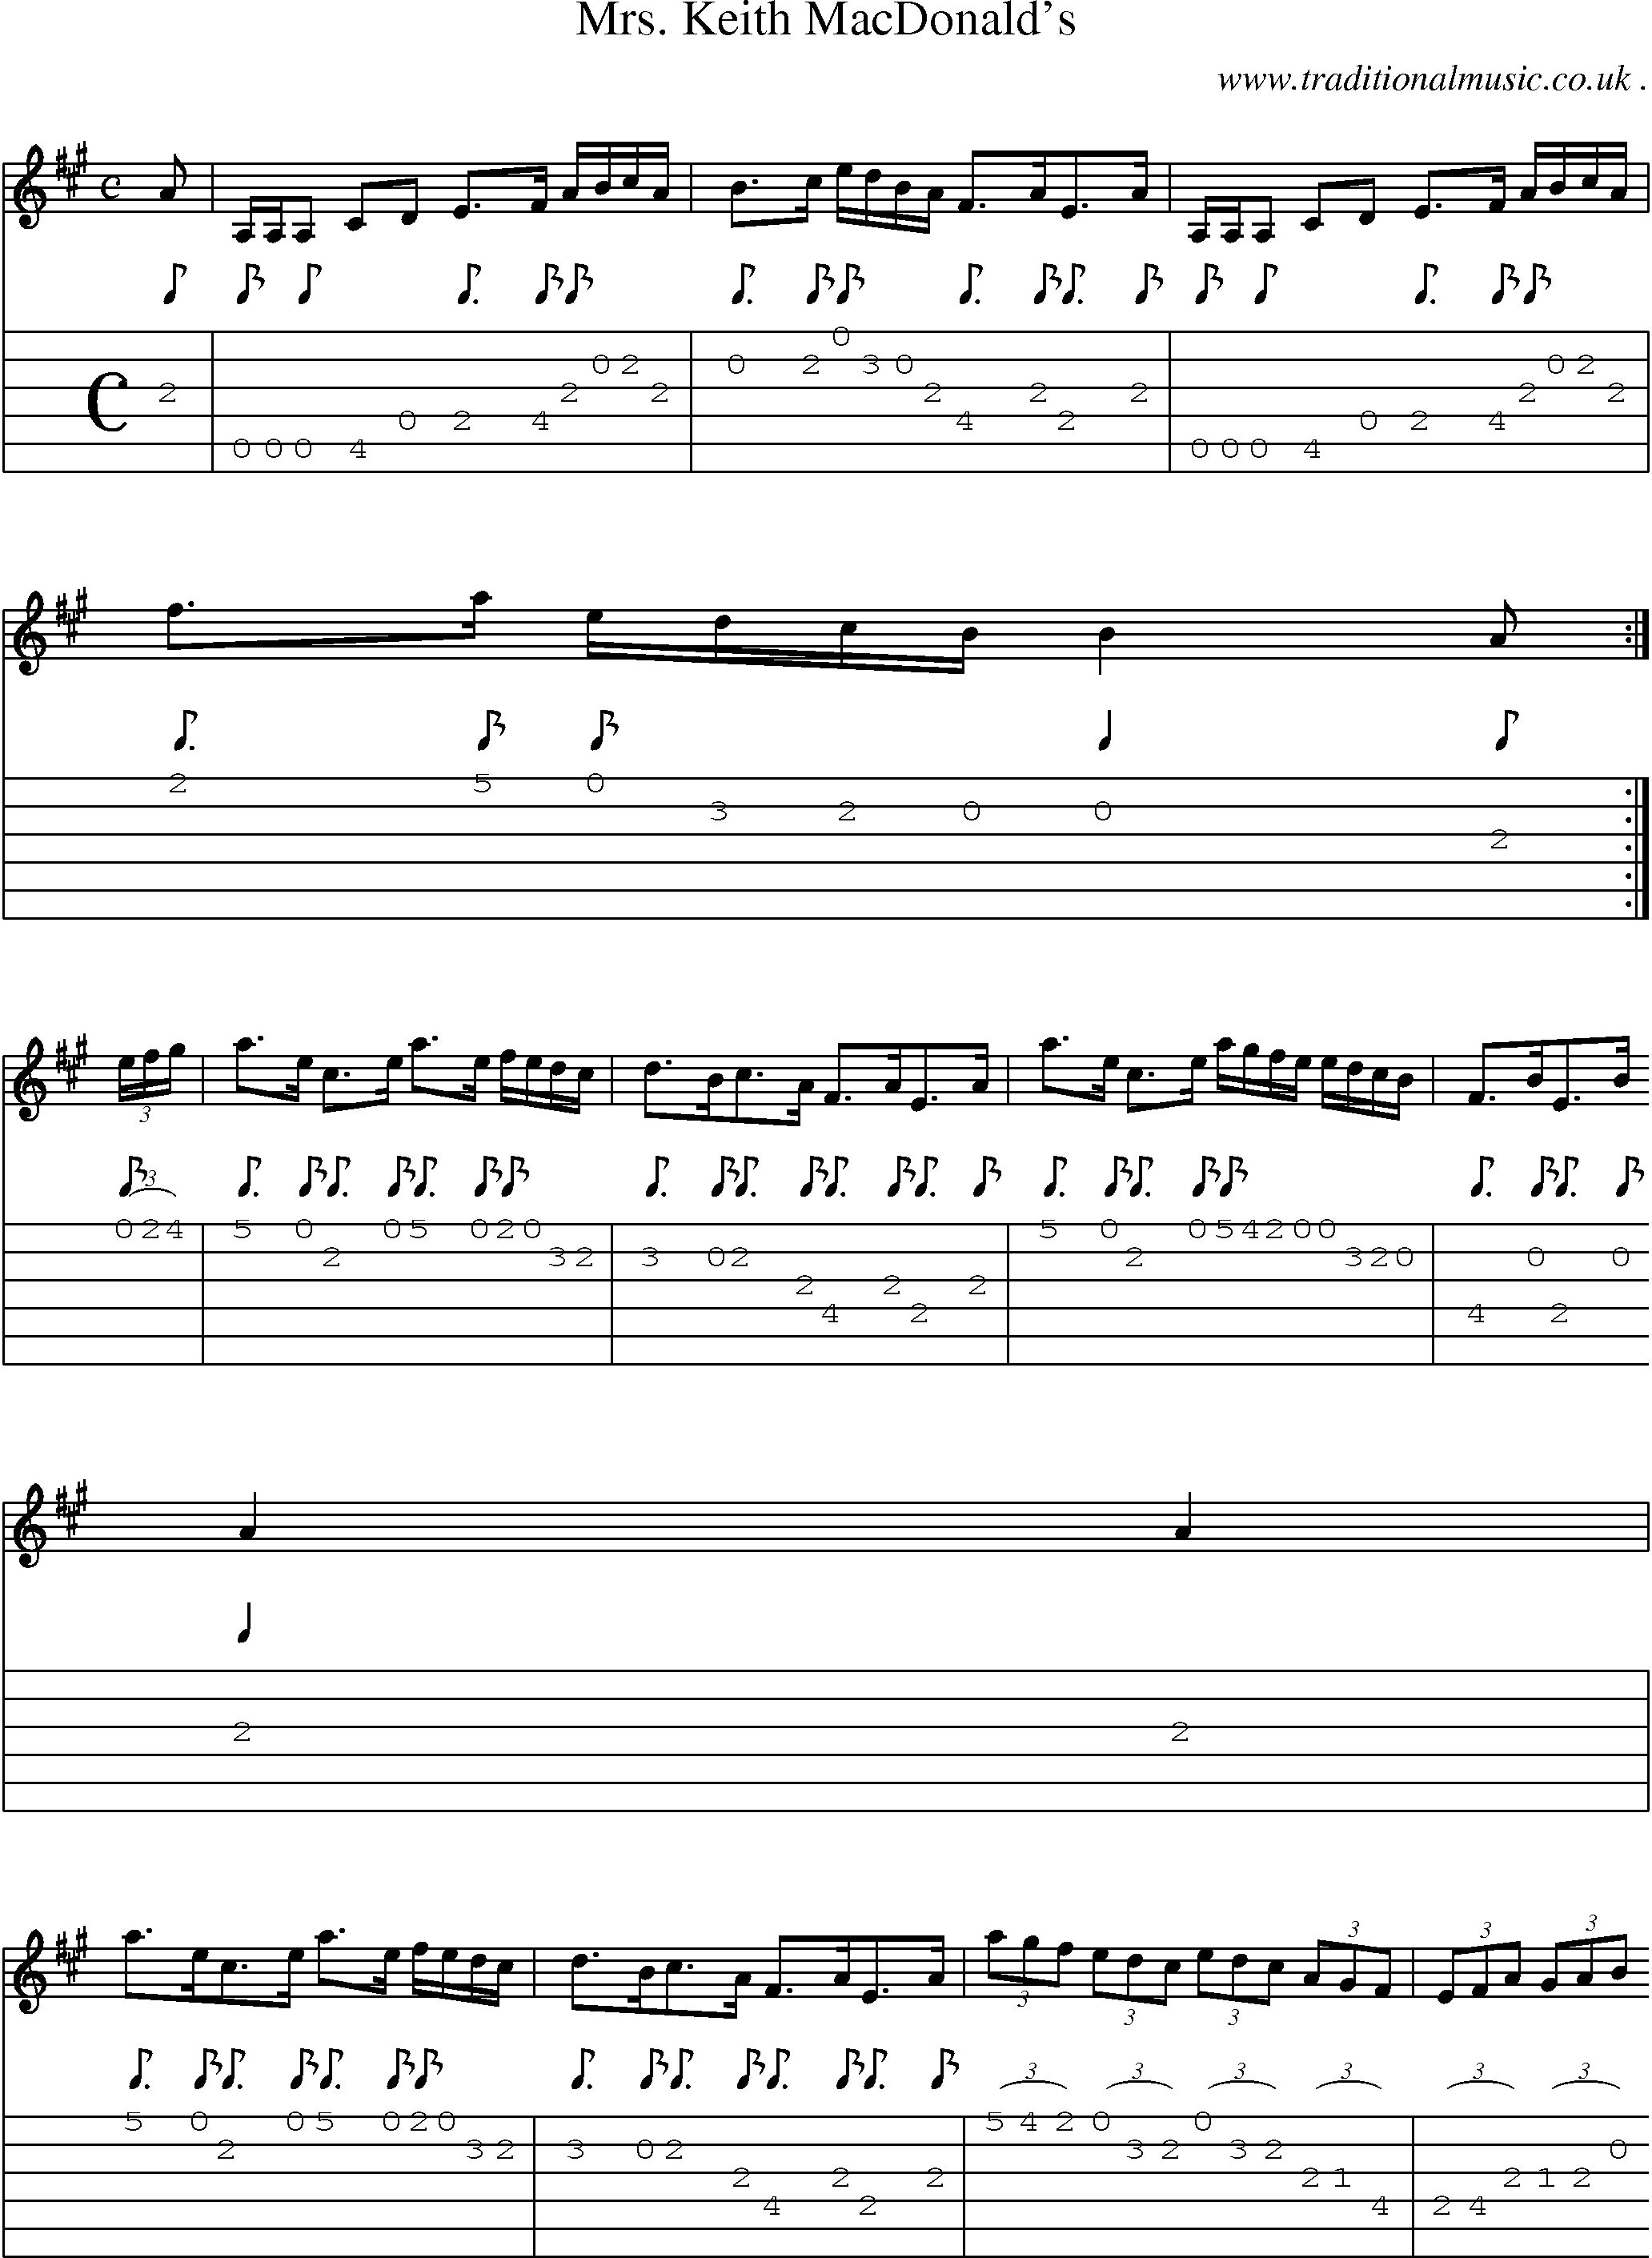 Sheet-music  score, Chords and Guitar Tabs for Mrs Keith Macdonalds